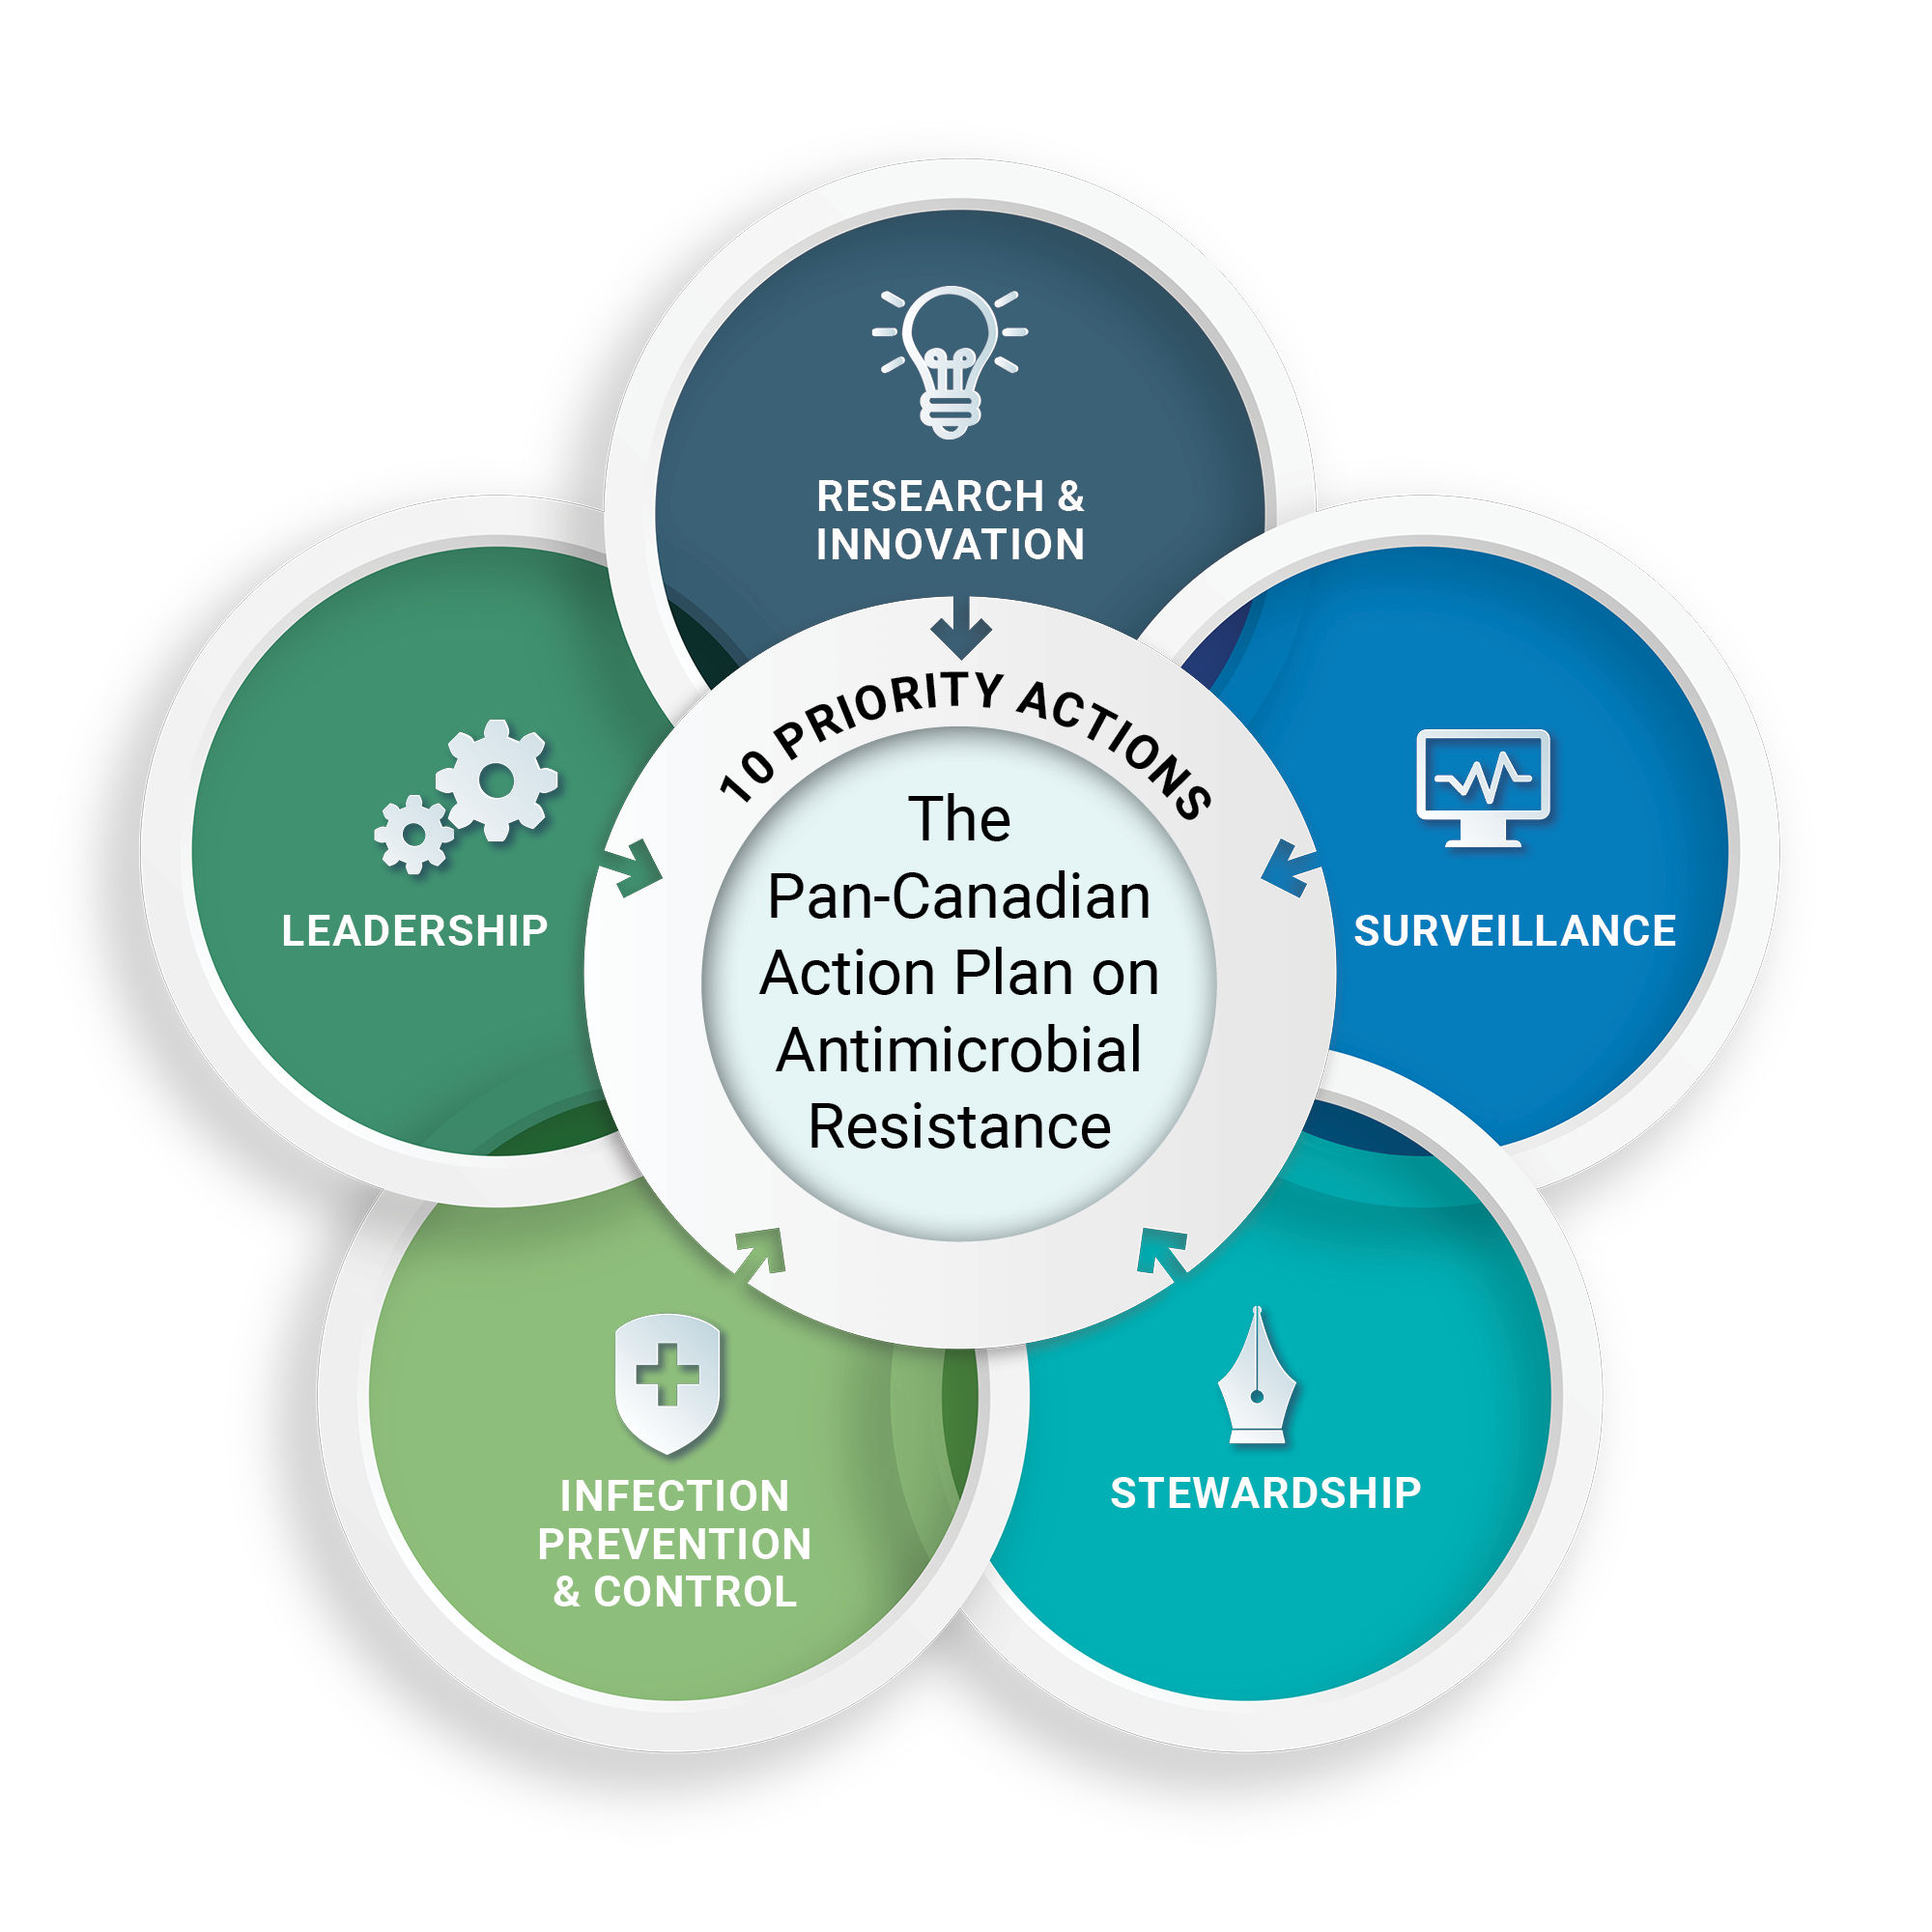 Figure 1: The action plan is a shared FPT commitment to address AMR across 5 pillars and 10 actions